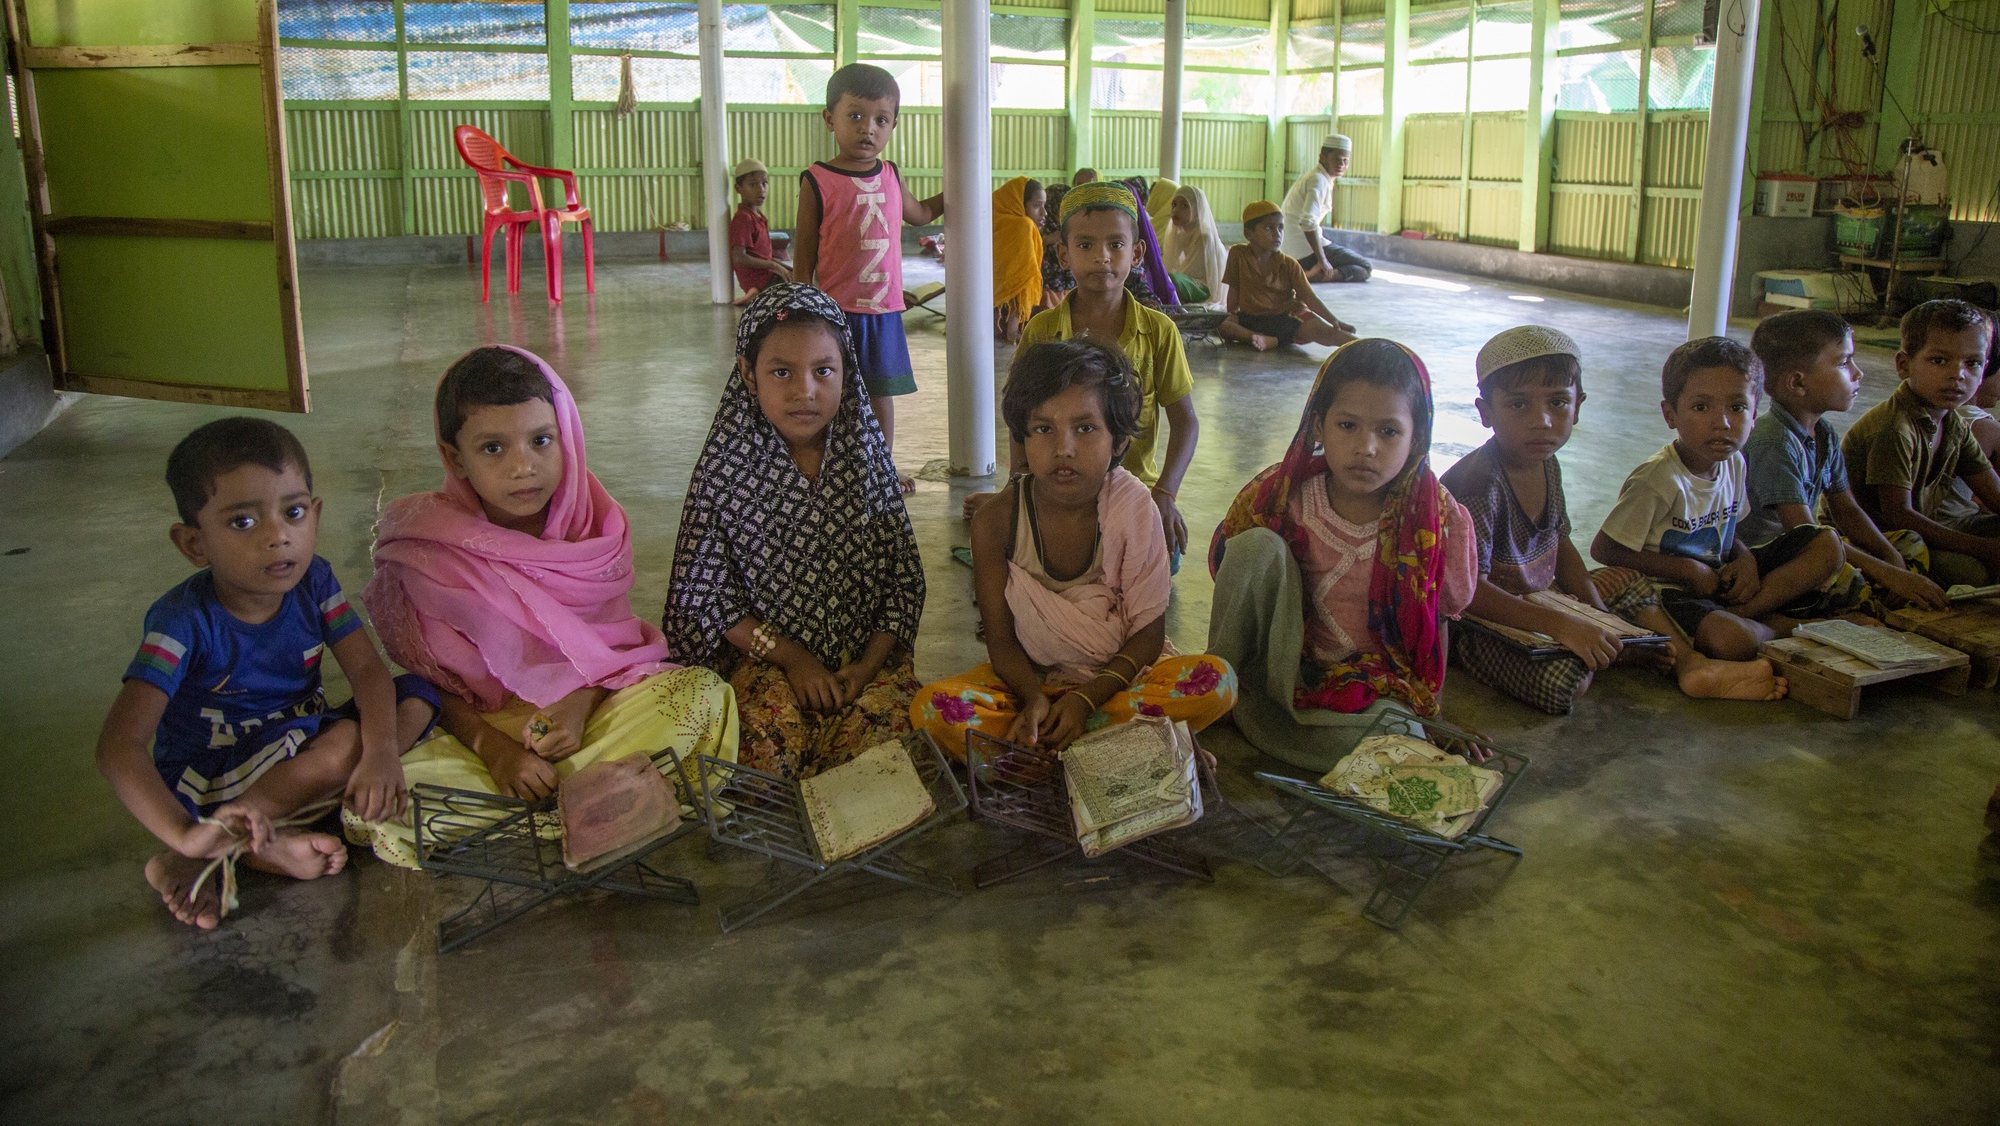 epa10136249 Rohingya refugees children read the Koran at the mosque of a makeshift camp in Kutubpalang, Ukhiya Cox Bazar district, Bangladesh, 24 August 2022. 25 August 2022 will mark five years since the exodus of the Rohingya Muslim ethnic minority from predominantly Buddhist Myanmar began in August 2017. According to the United Nations High Commissioner for Refugees (UNHCR), nearly 925,000 Rohingya refugees live in Bangladesh and Cox’s Bazar region after they fled Myanmar, especially since the start of the military crackdown in 2017 which the UN described as ethnic cleansing and possible genocide. Attempts for the repatriation of refugees from Bangladesh to Myanmar failed as Rohingyas refused to return home without a guarantee of citizenship and security.  EPA/MONIRUL ALAM